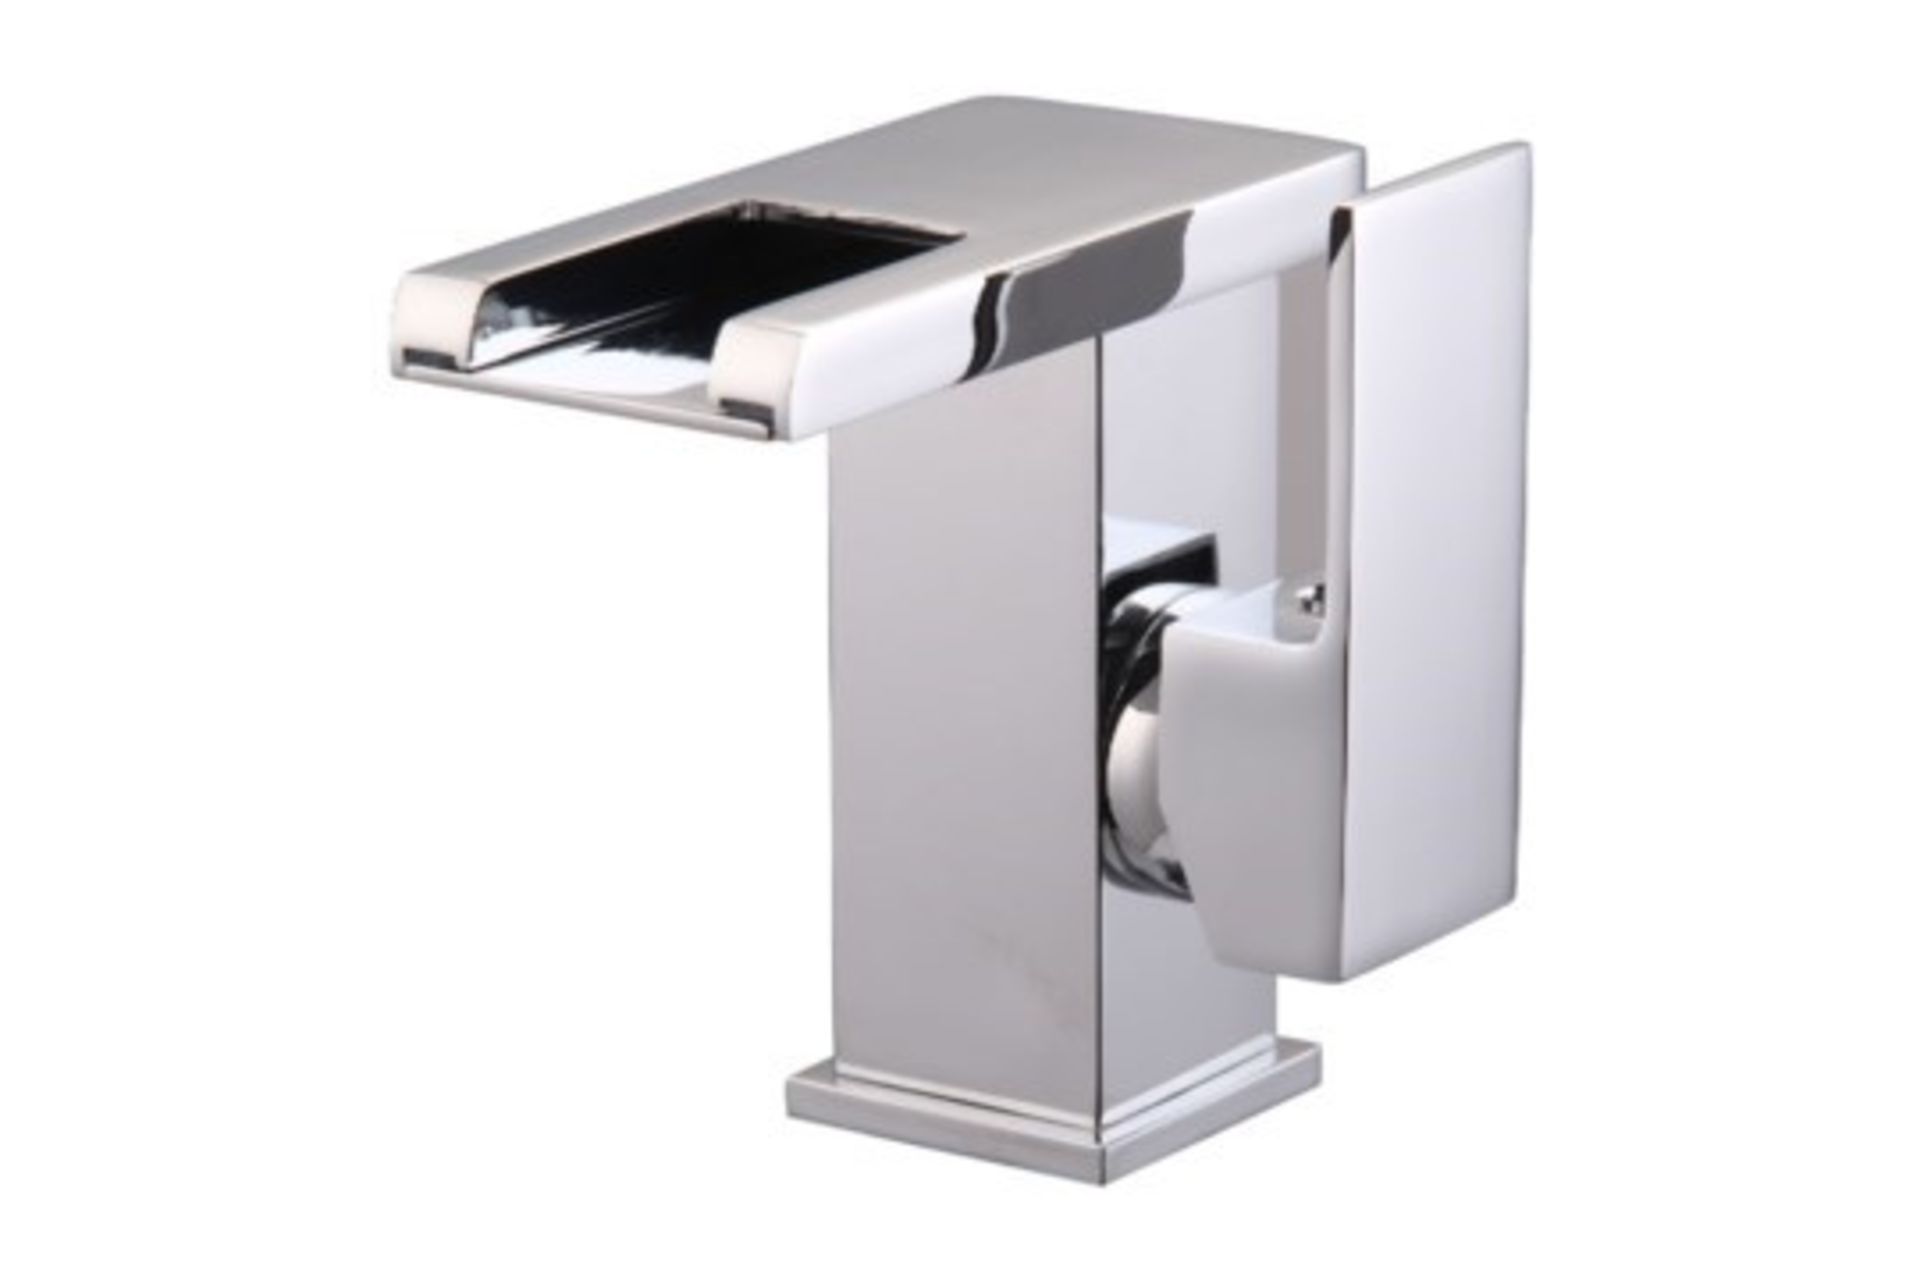 LED Waterfall Bathroom Basin Mixer Tap. RRP £229.99.Easy to install and clean. All copper mou... LED - Image 3 of 3